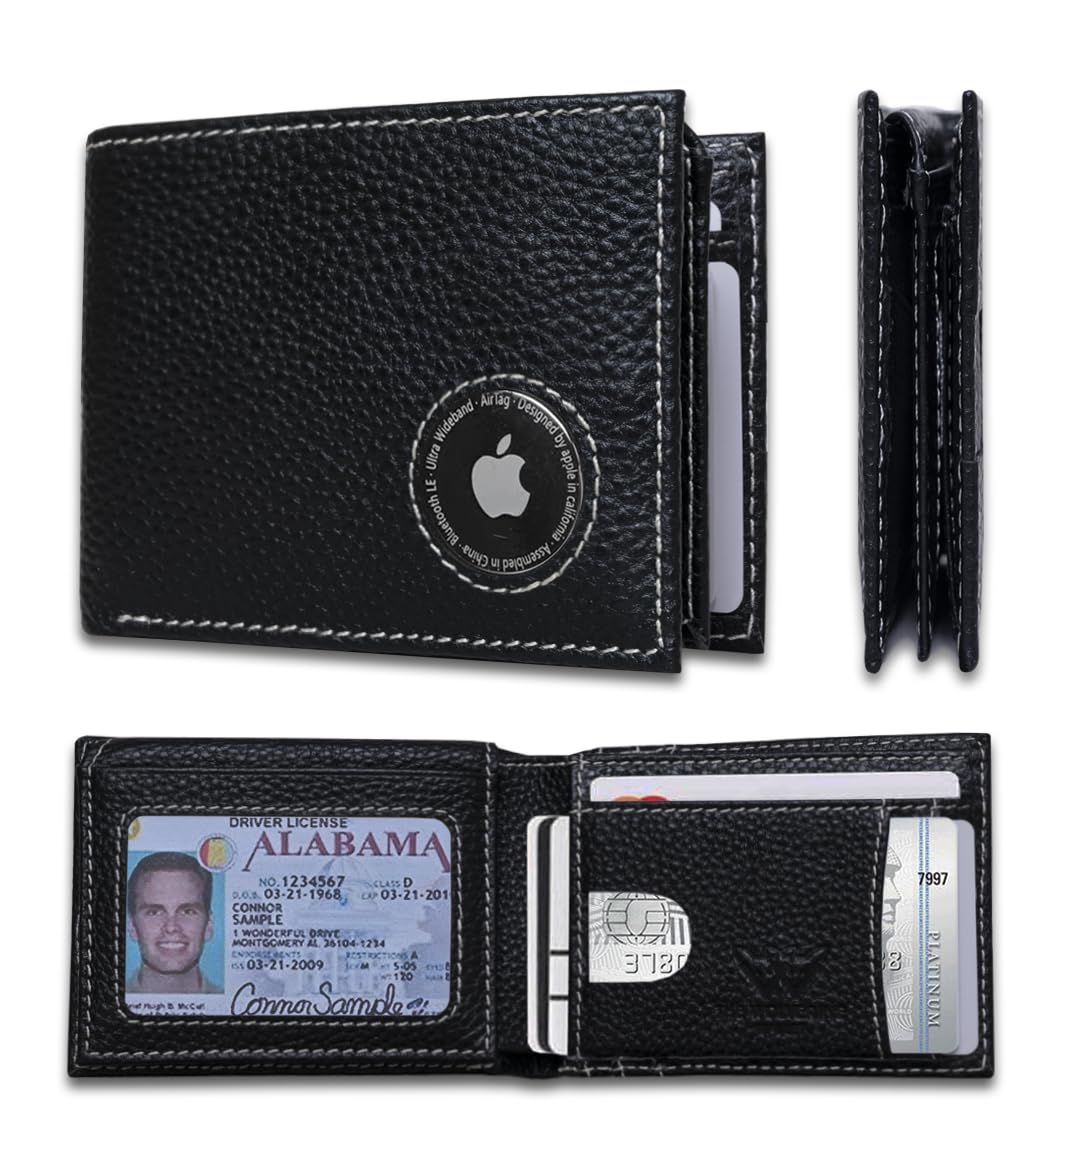 Apple AirTag Wallet for Men - Genuine Leather Bifold RFID Wallet with AirTag Holder, 11-20 Card Slots, Handcrafted Full Grain Leather, ID Window, RFID Blocking,Two money slots (Airtag Not Included), Jet Black, Handcrafted Bifold